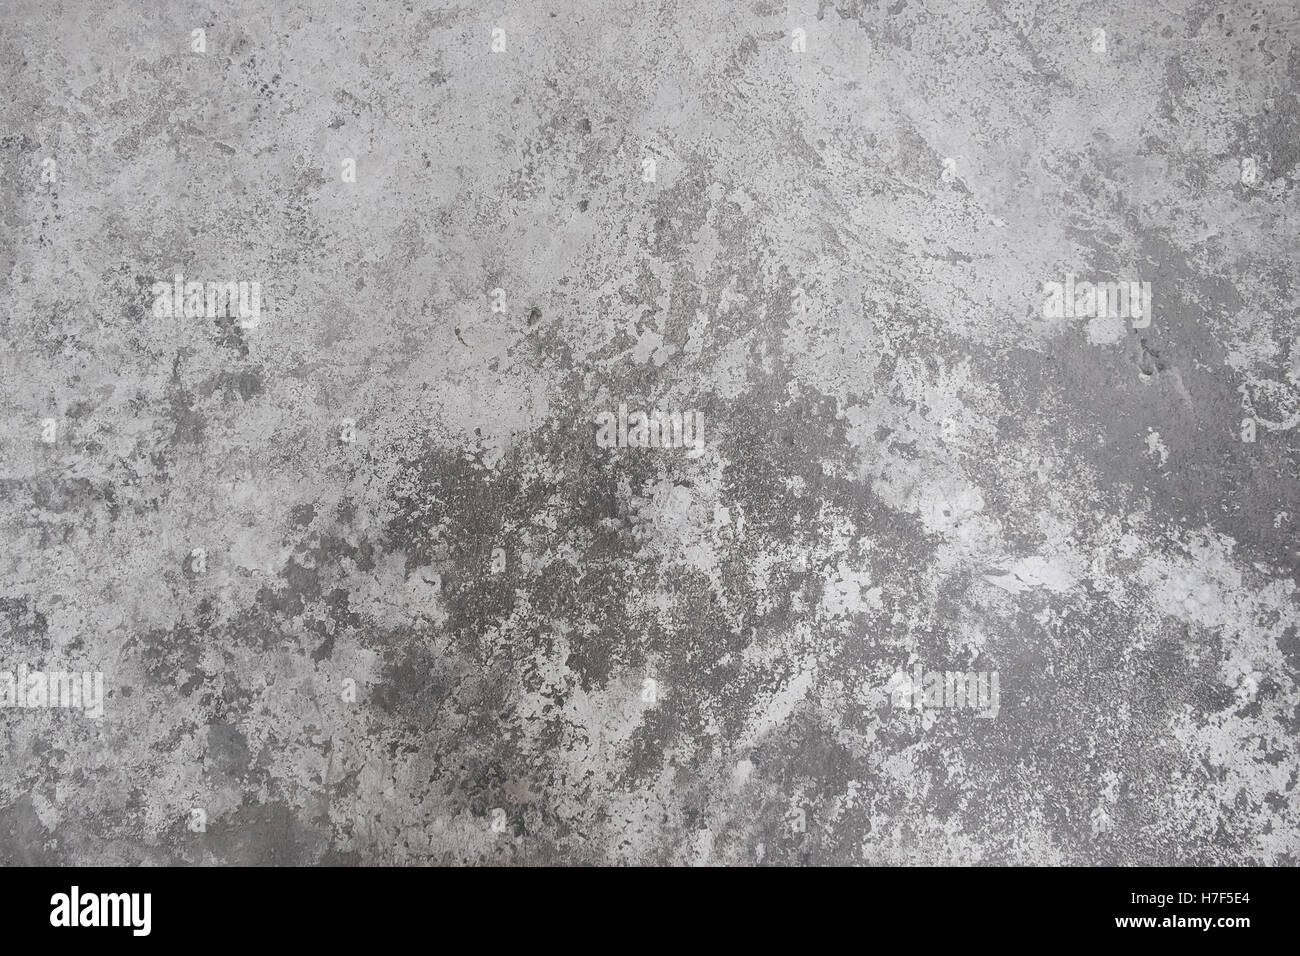 Polished Old Grey Concrete Floor Texture Background Stock Photo Alamy